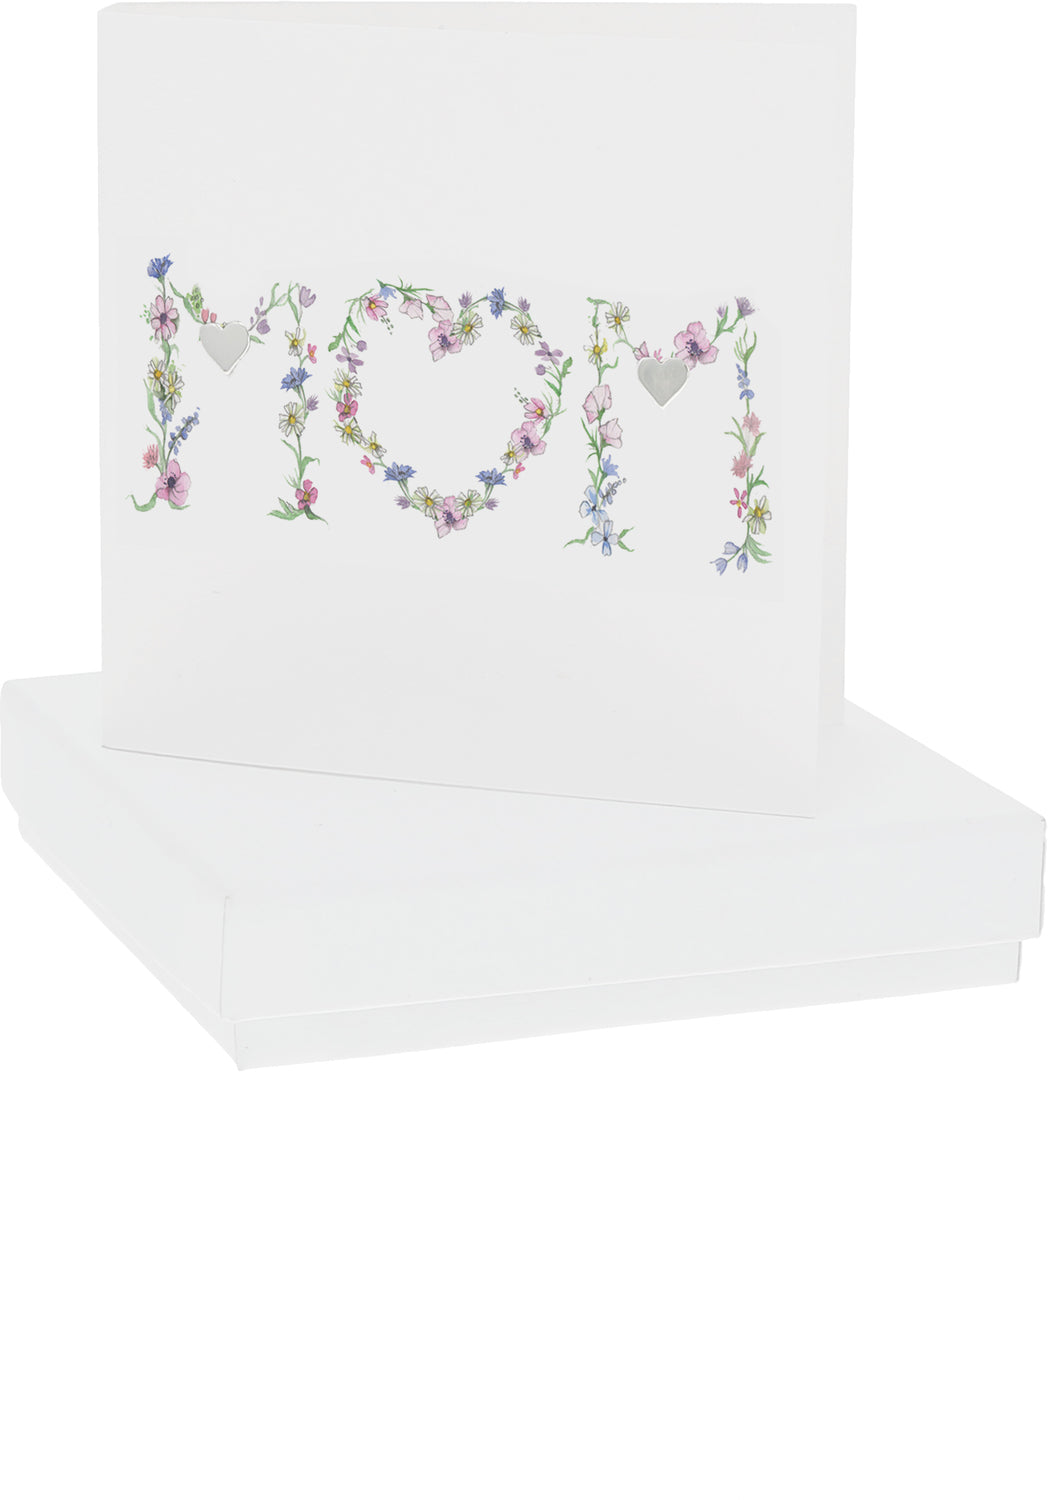 Mom Gift Card with Sterling Silver Earrings